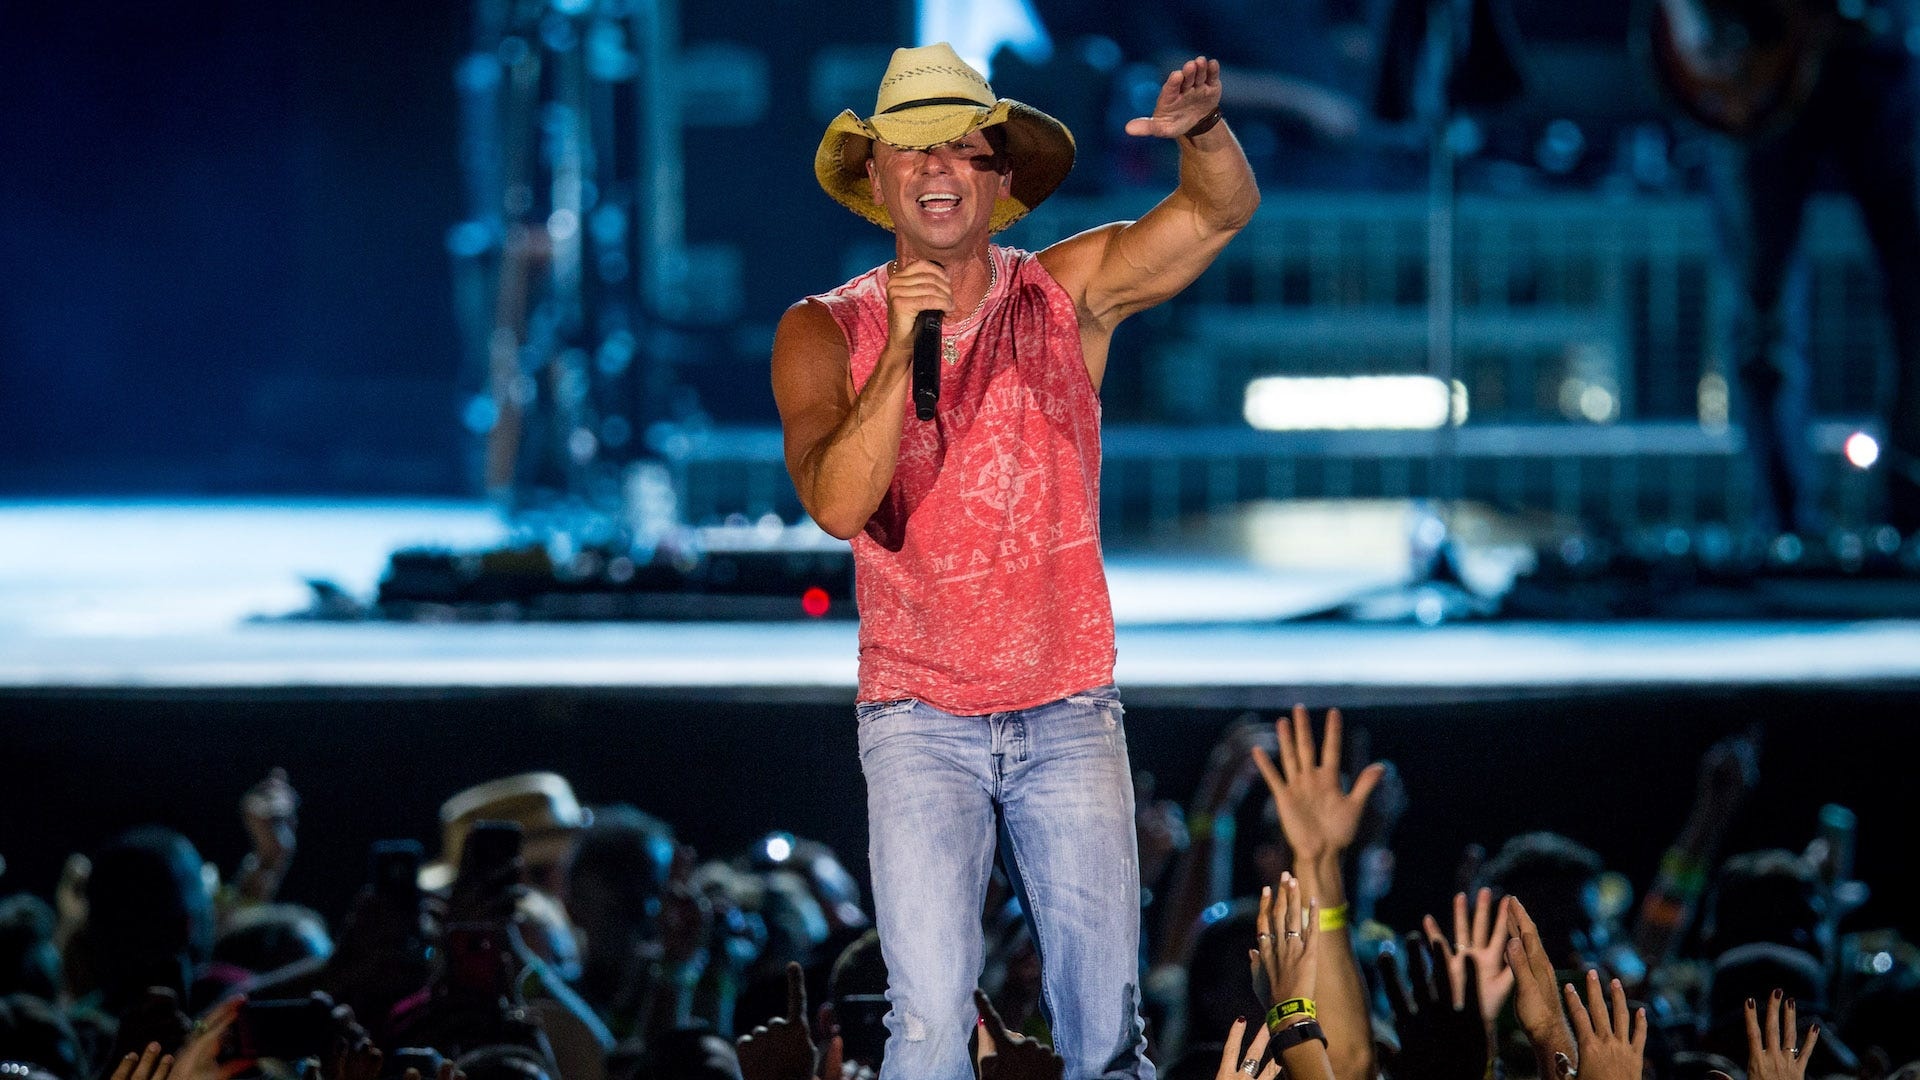 Kenny Chesney has added 20 shows to 2022 'Here and Now Tour' 1920x1080